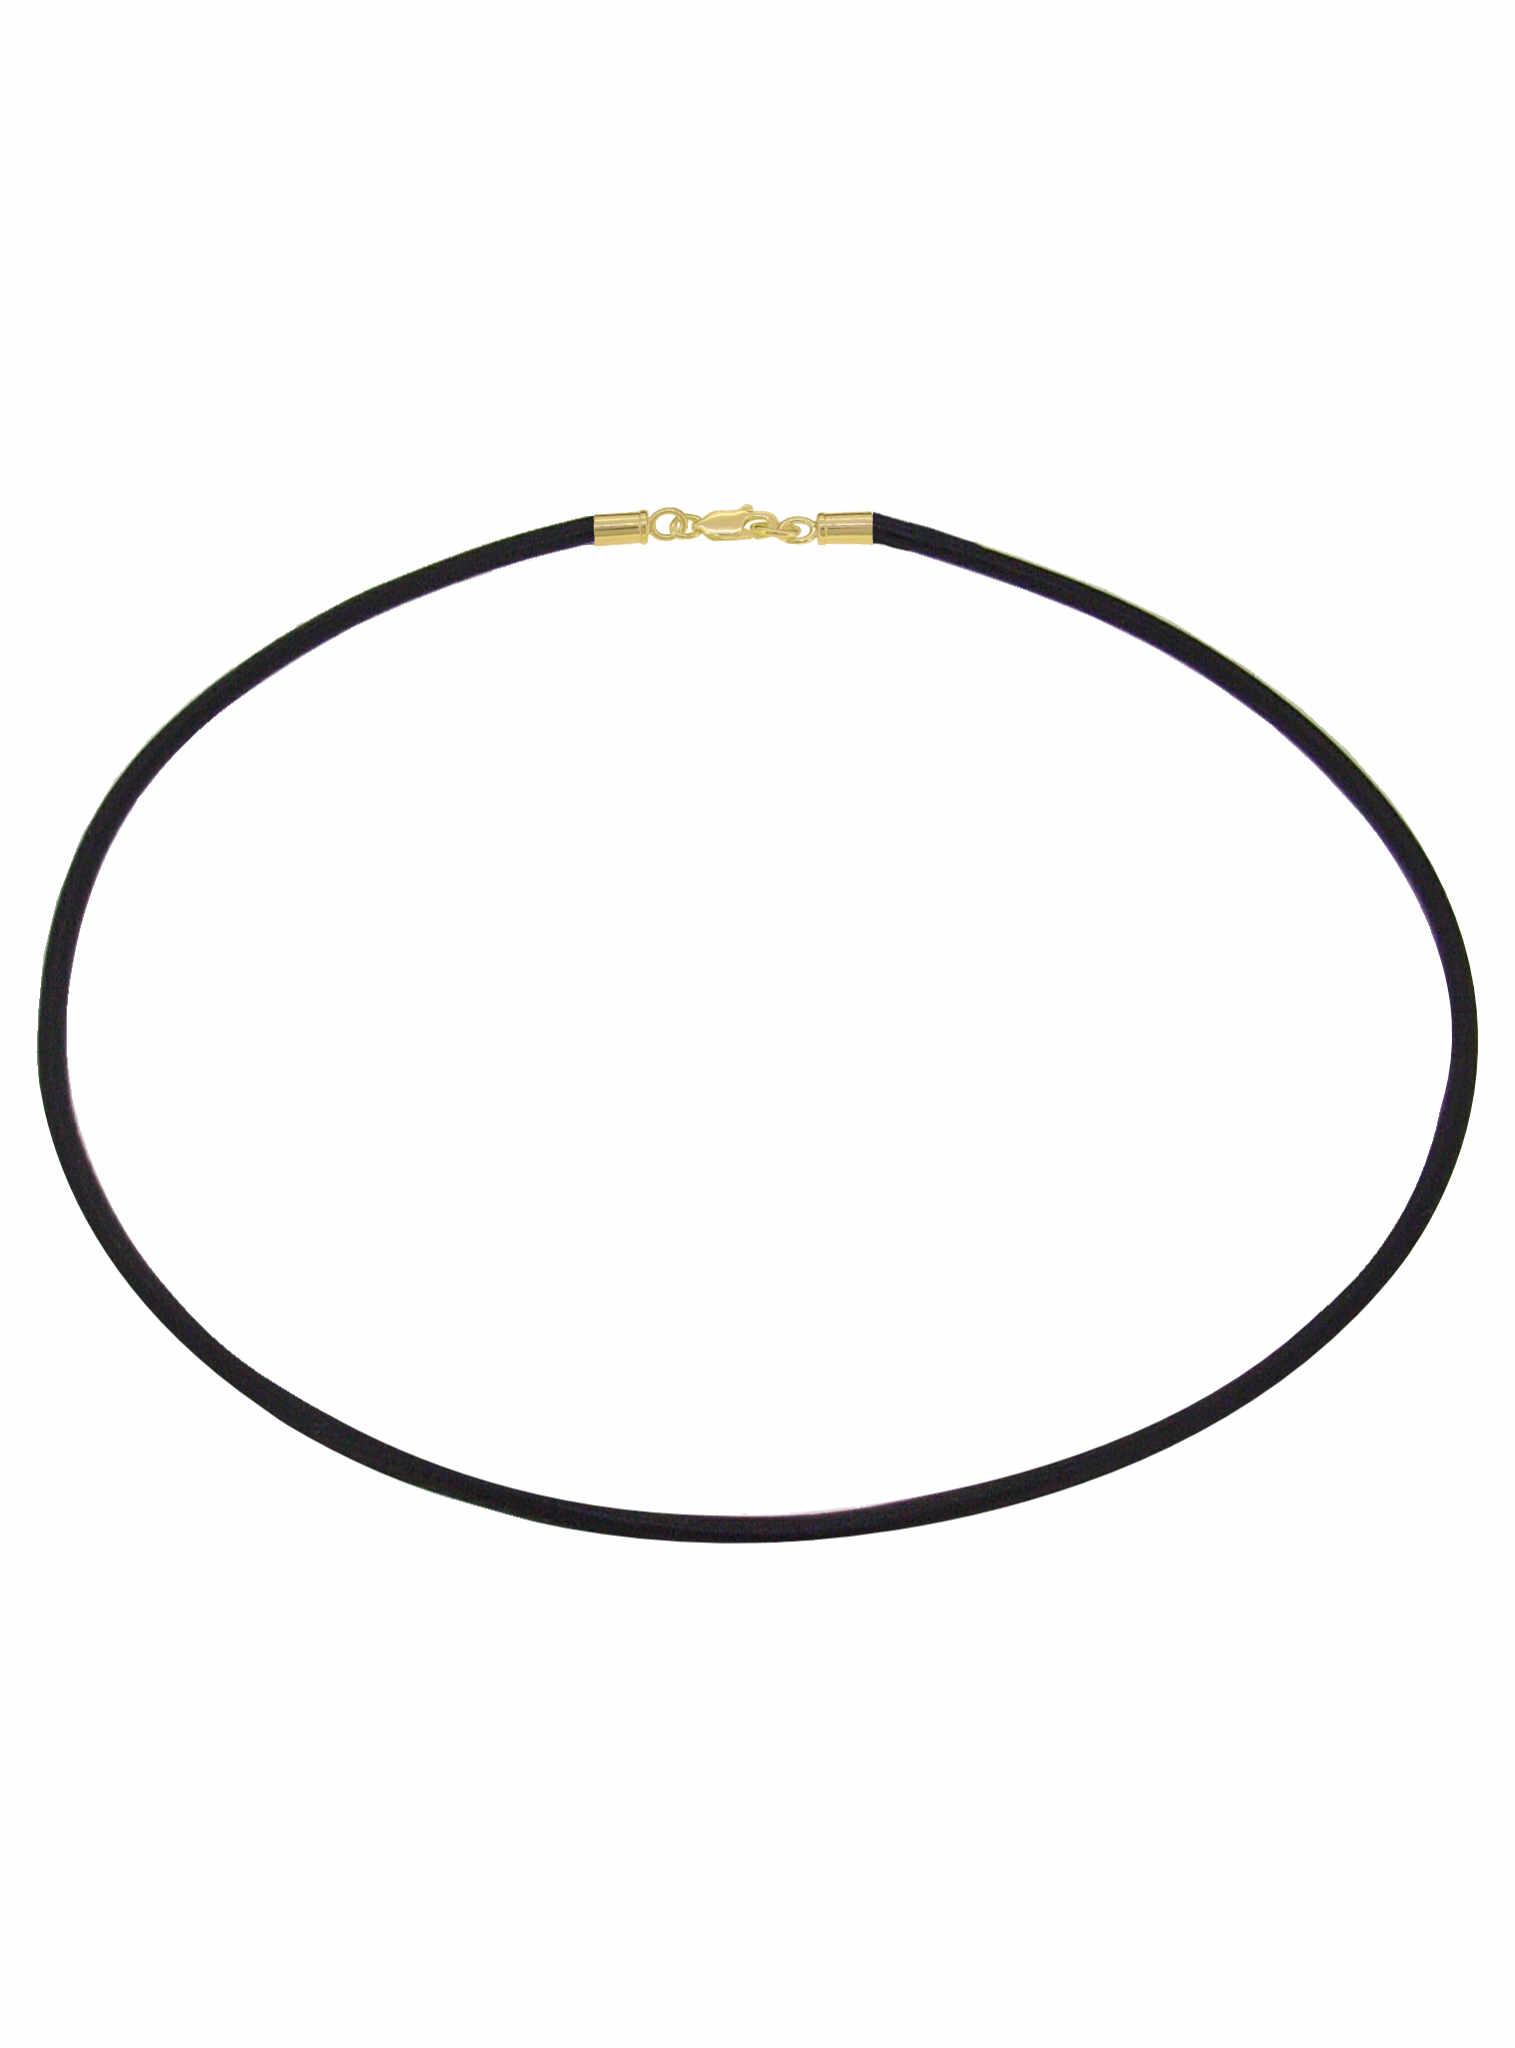 Leather 'Gucci' necklace in black leather | GUCCI® US